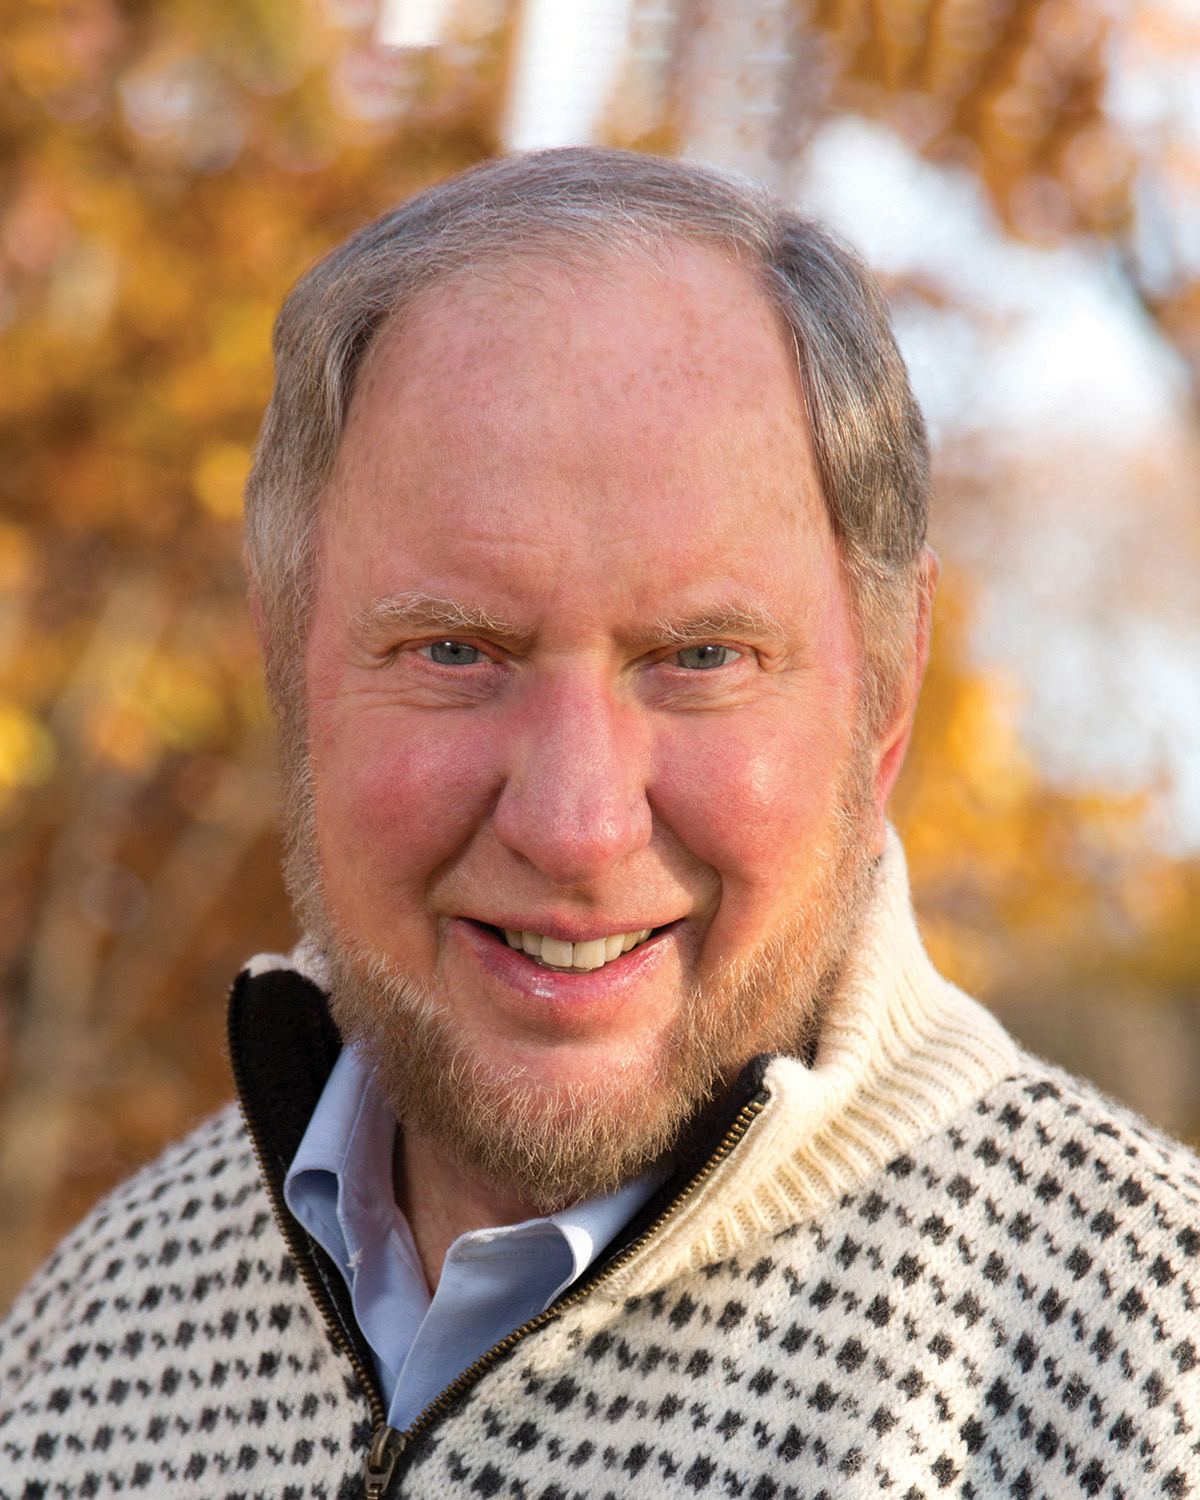 A photograph of Robert D. Putnam, a person with pale skin and gray hair. He faces the camera and smiles.